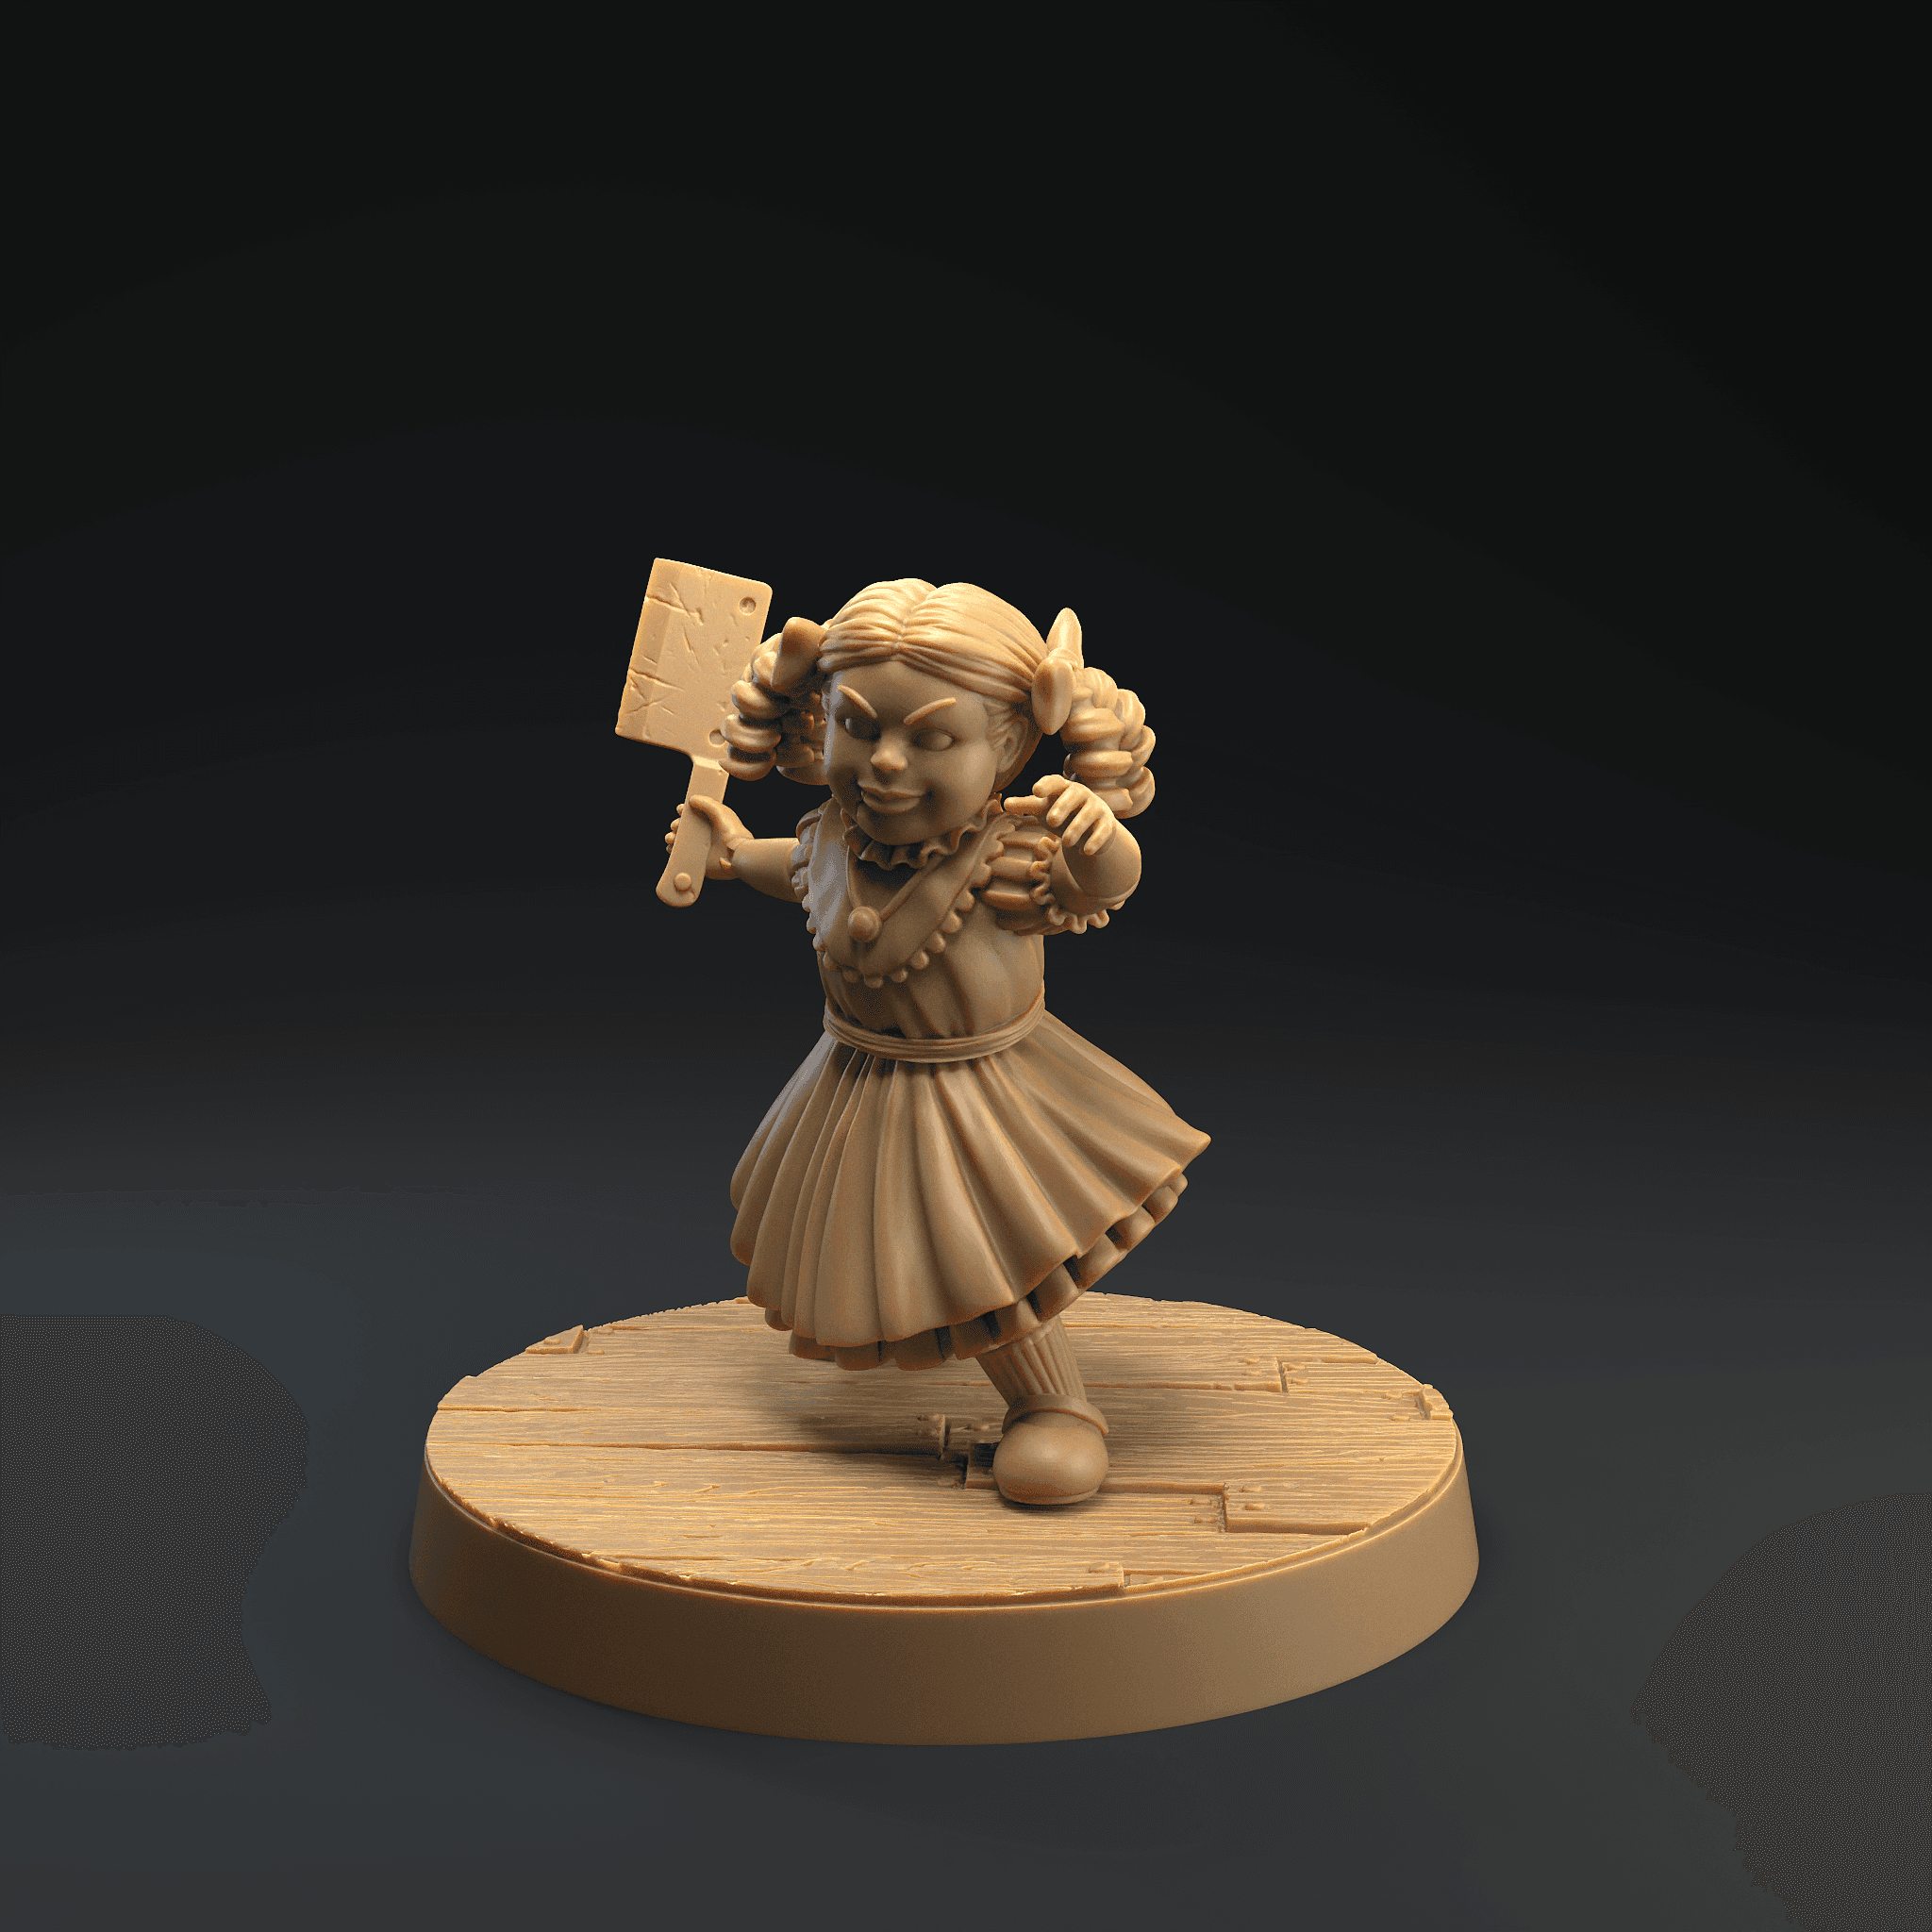  Animated Doll with Cleaver 3d model